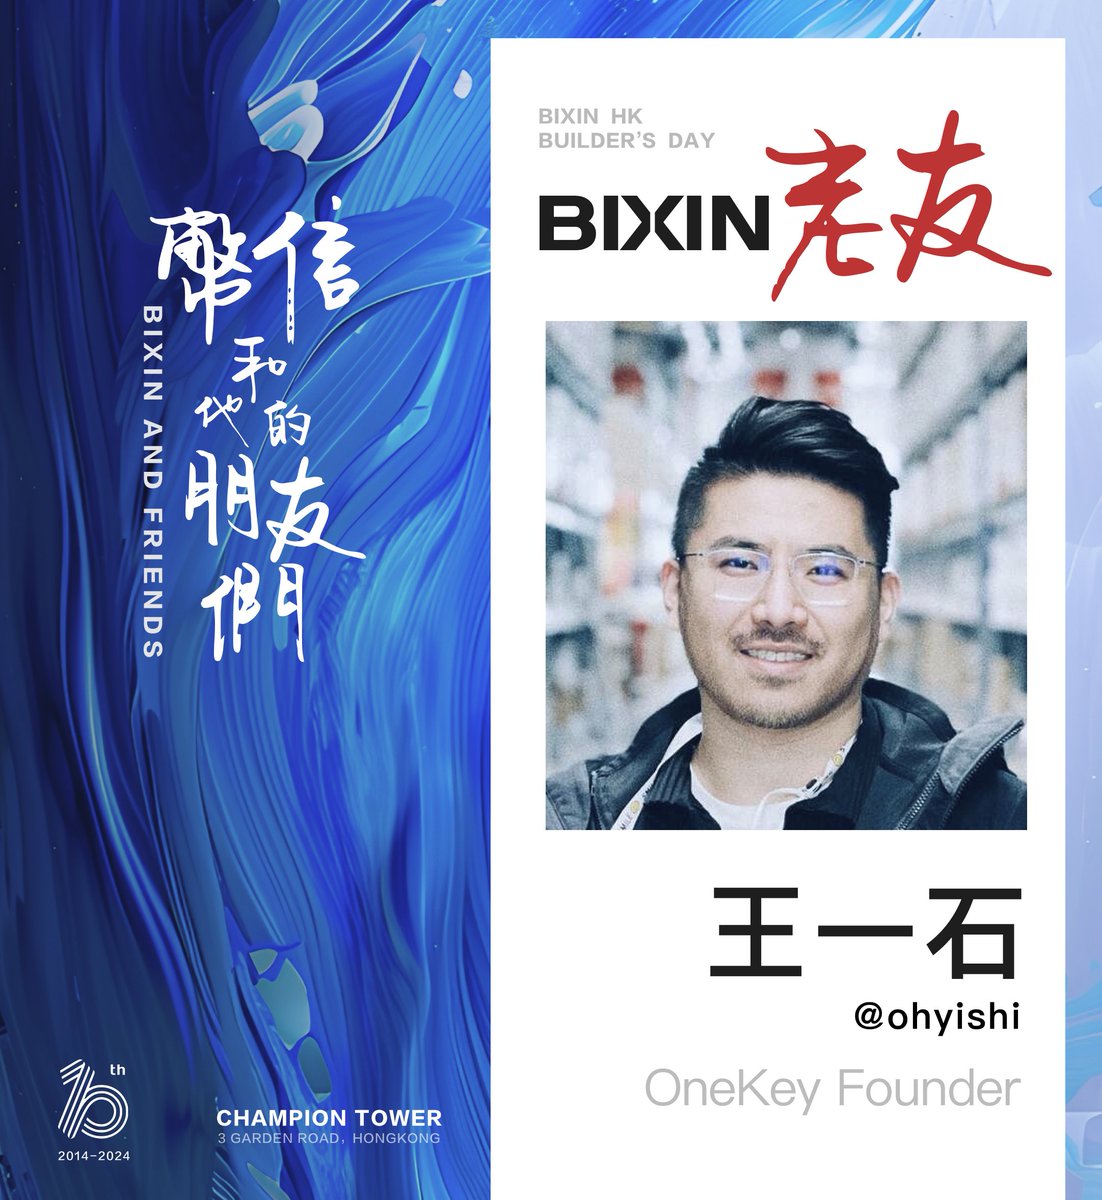 👽 Join us at #BixinHK 2024 as we welcome the renowned guest speaker: Yishi Wang @ohyishi. ▶️ No stranger to the crypto community, he is the founder of the hardware wallet #OneKey. 🫂 #Bixin celebrates its 10th anniversary with a reunion with @ohyishi, anticipating an…